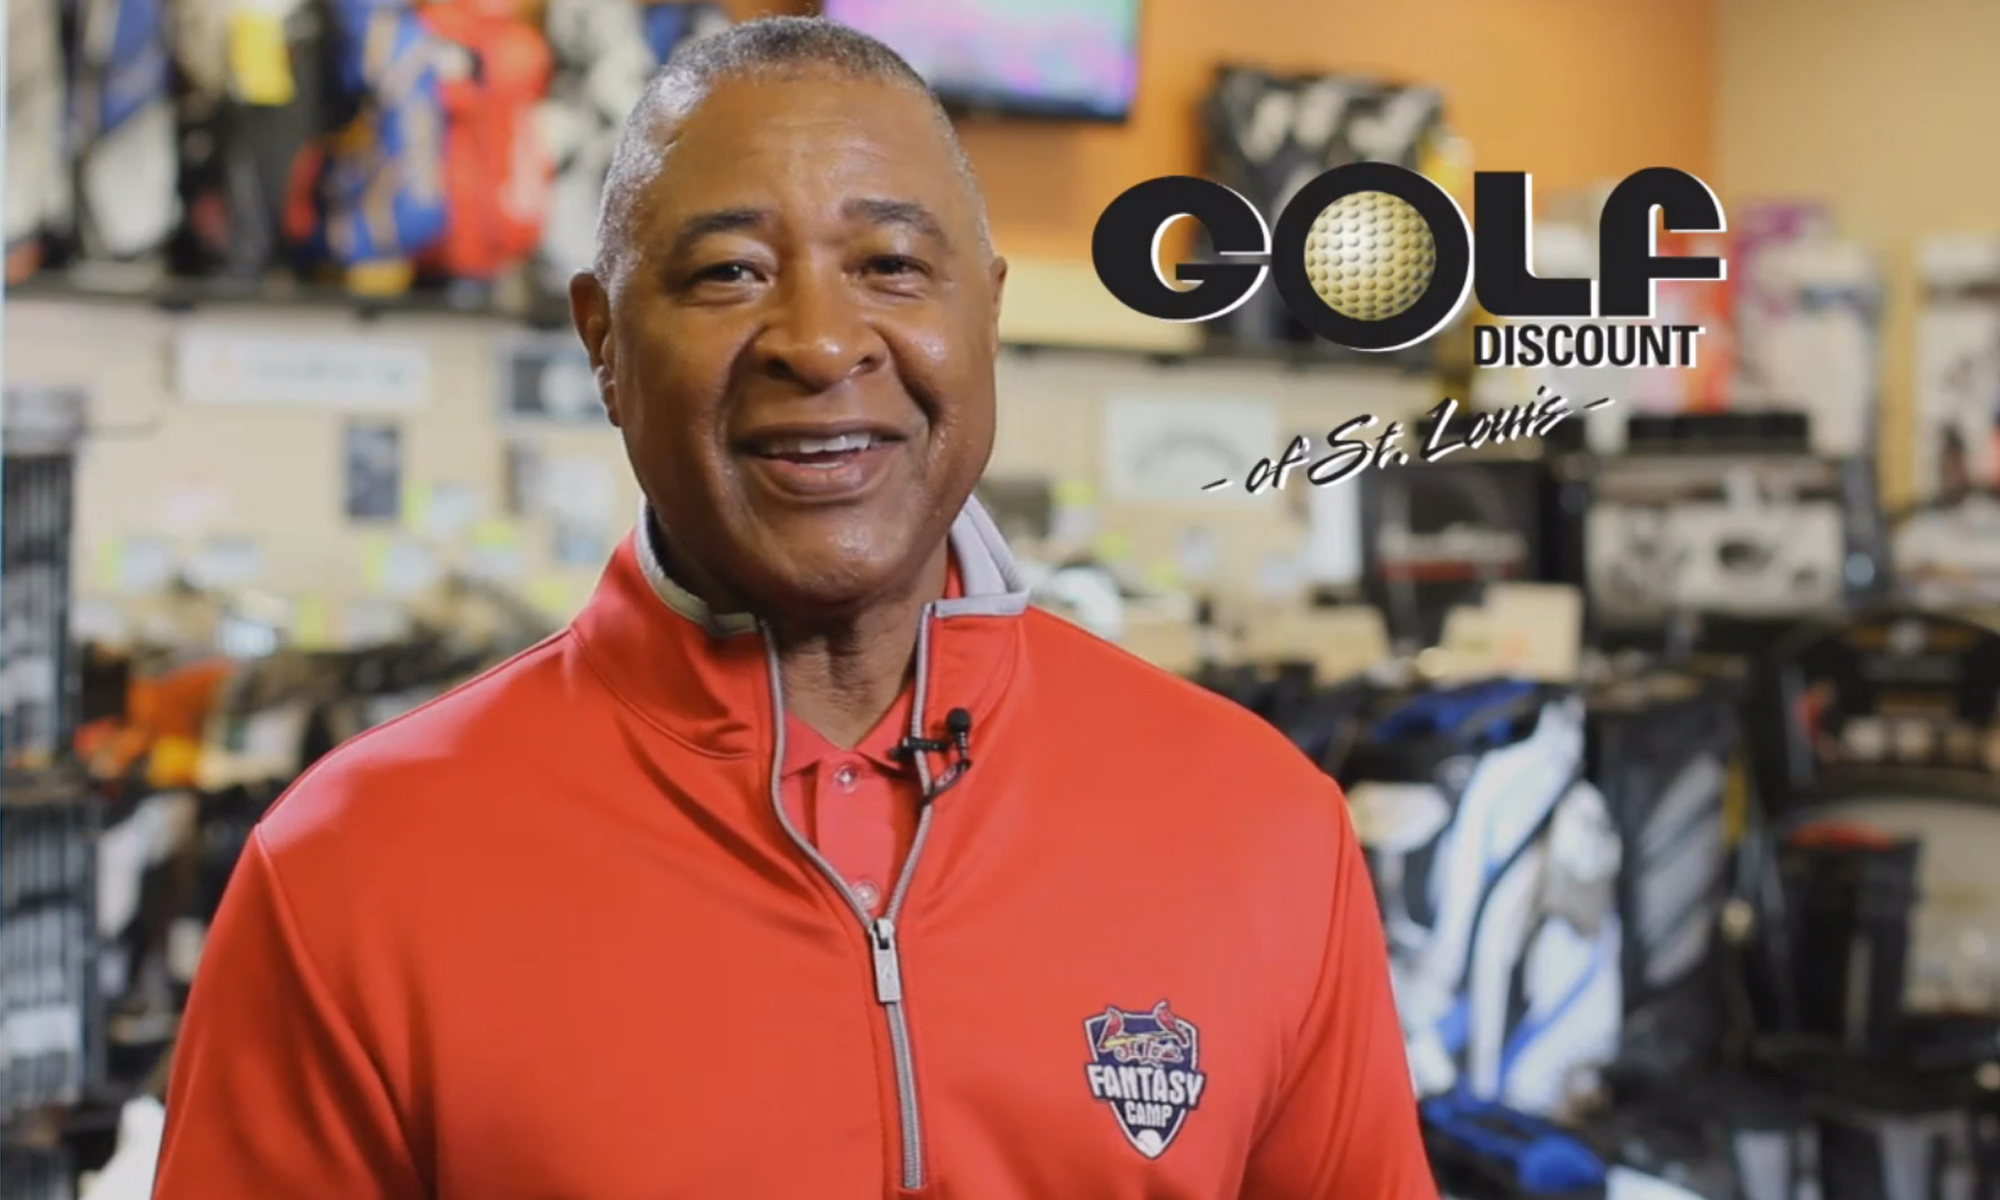 Golf Discount of St. Louis - Melvin Ide